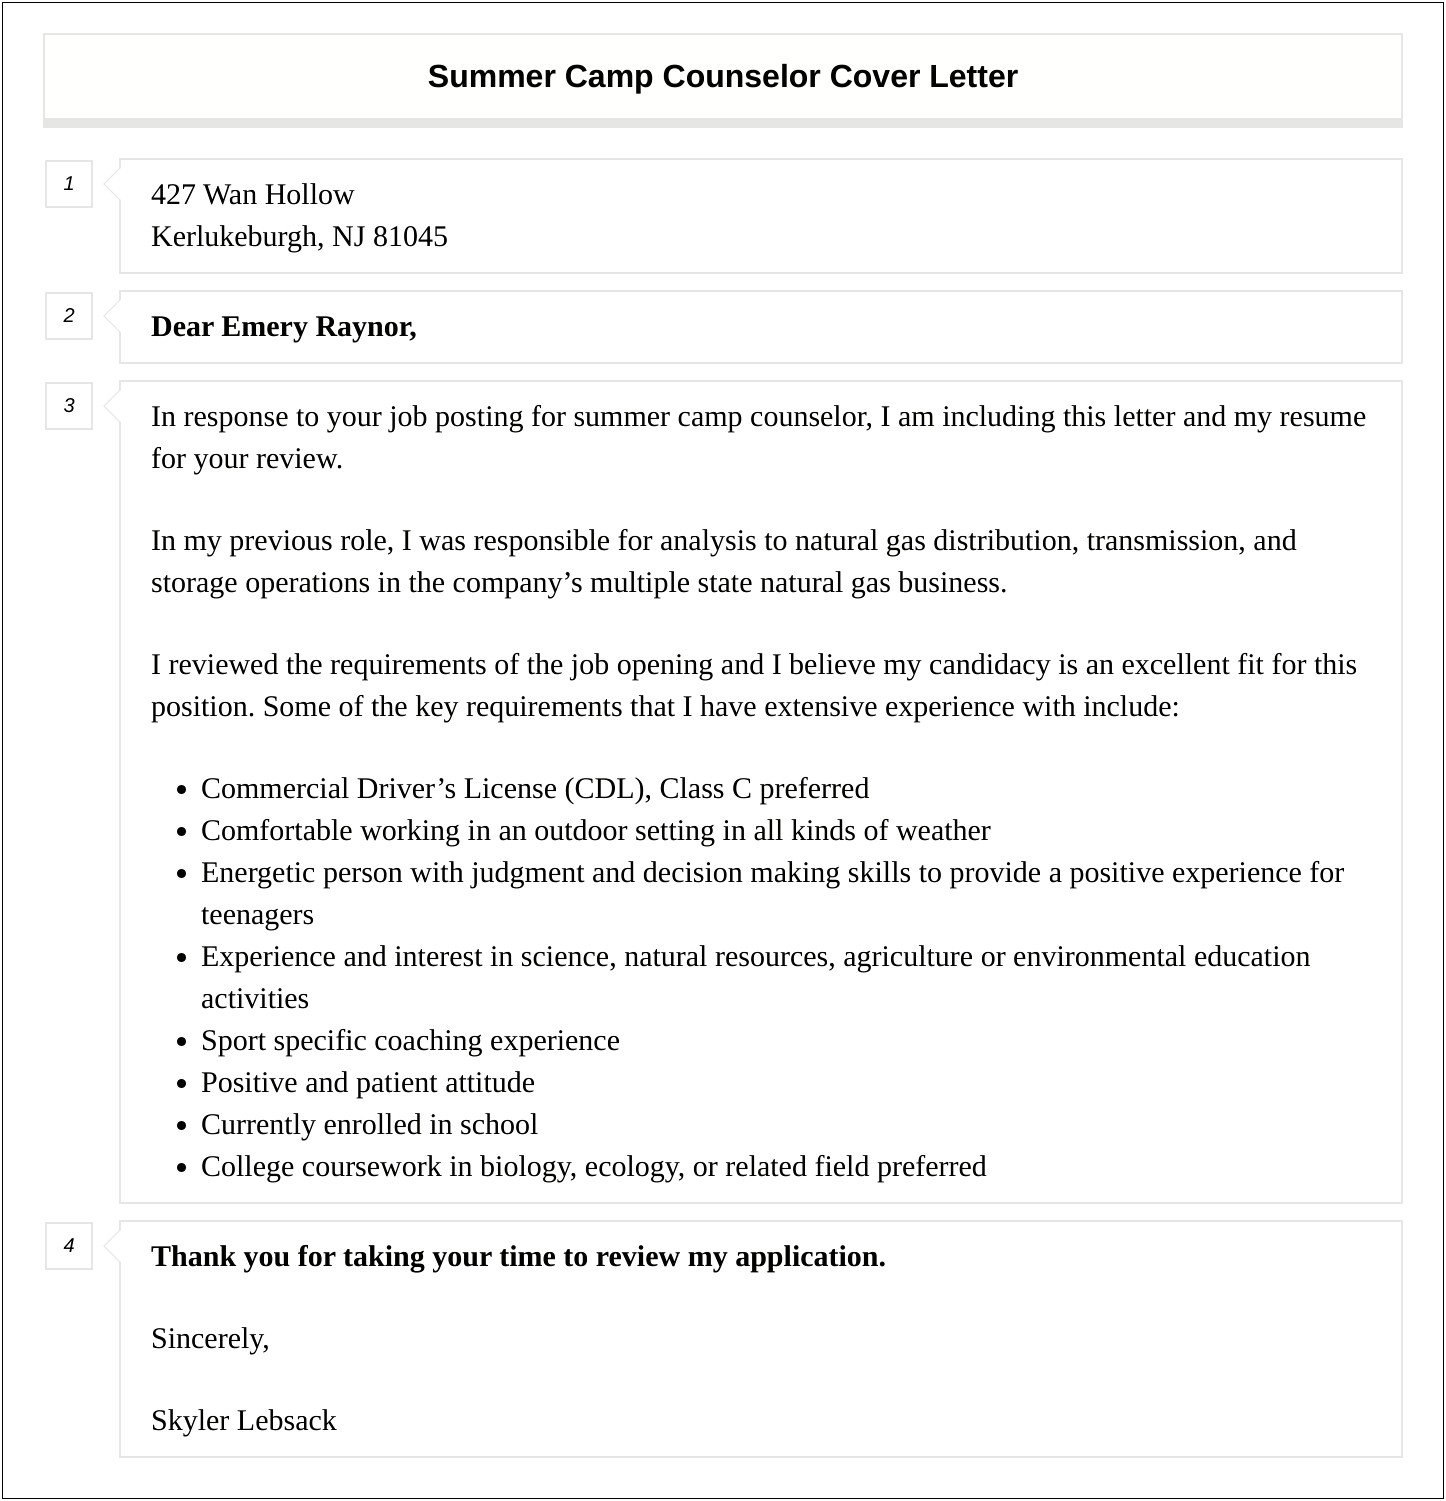 Summer Camp Counselor Resume Cover Letter